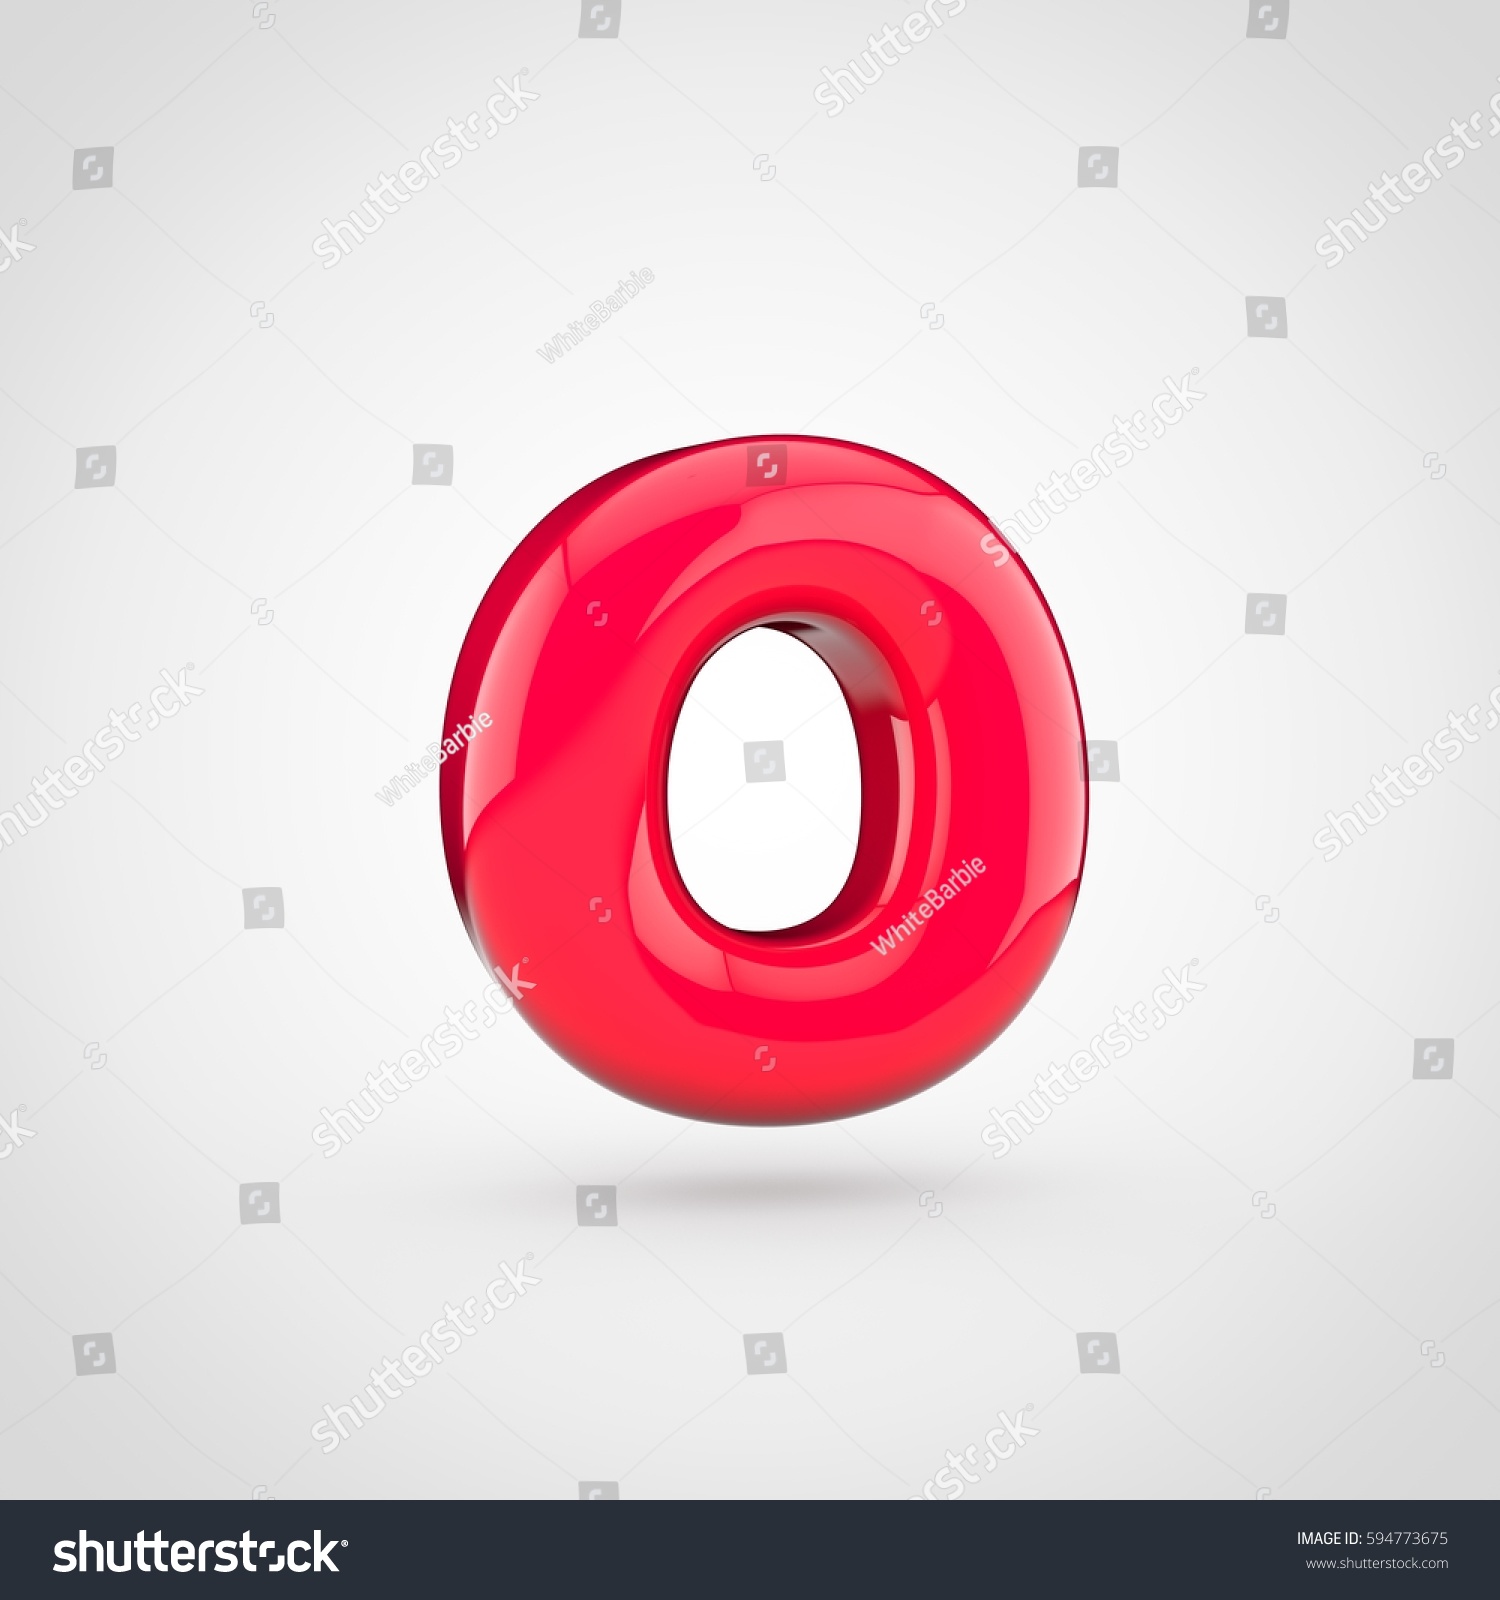 Royalty Free Stock Illustration Of Glossy Red Paint Letter O